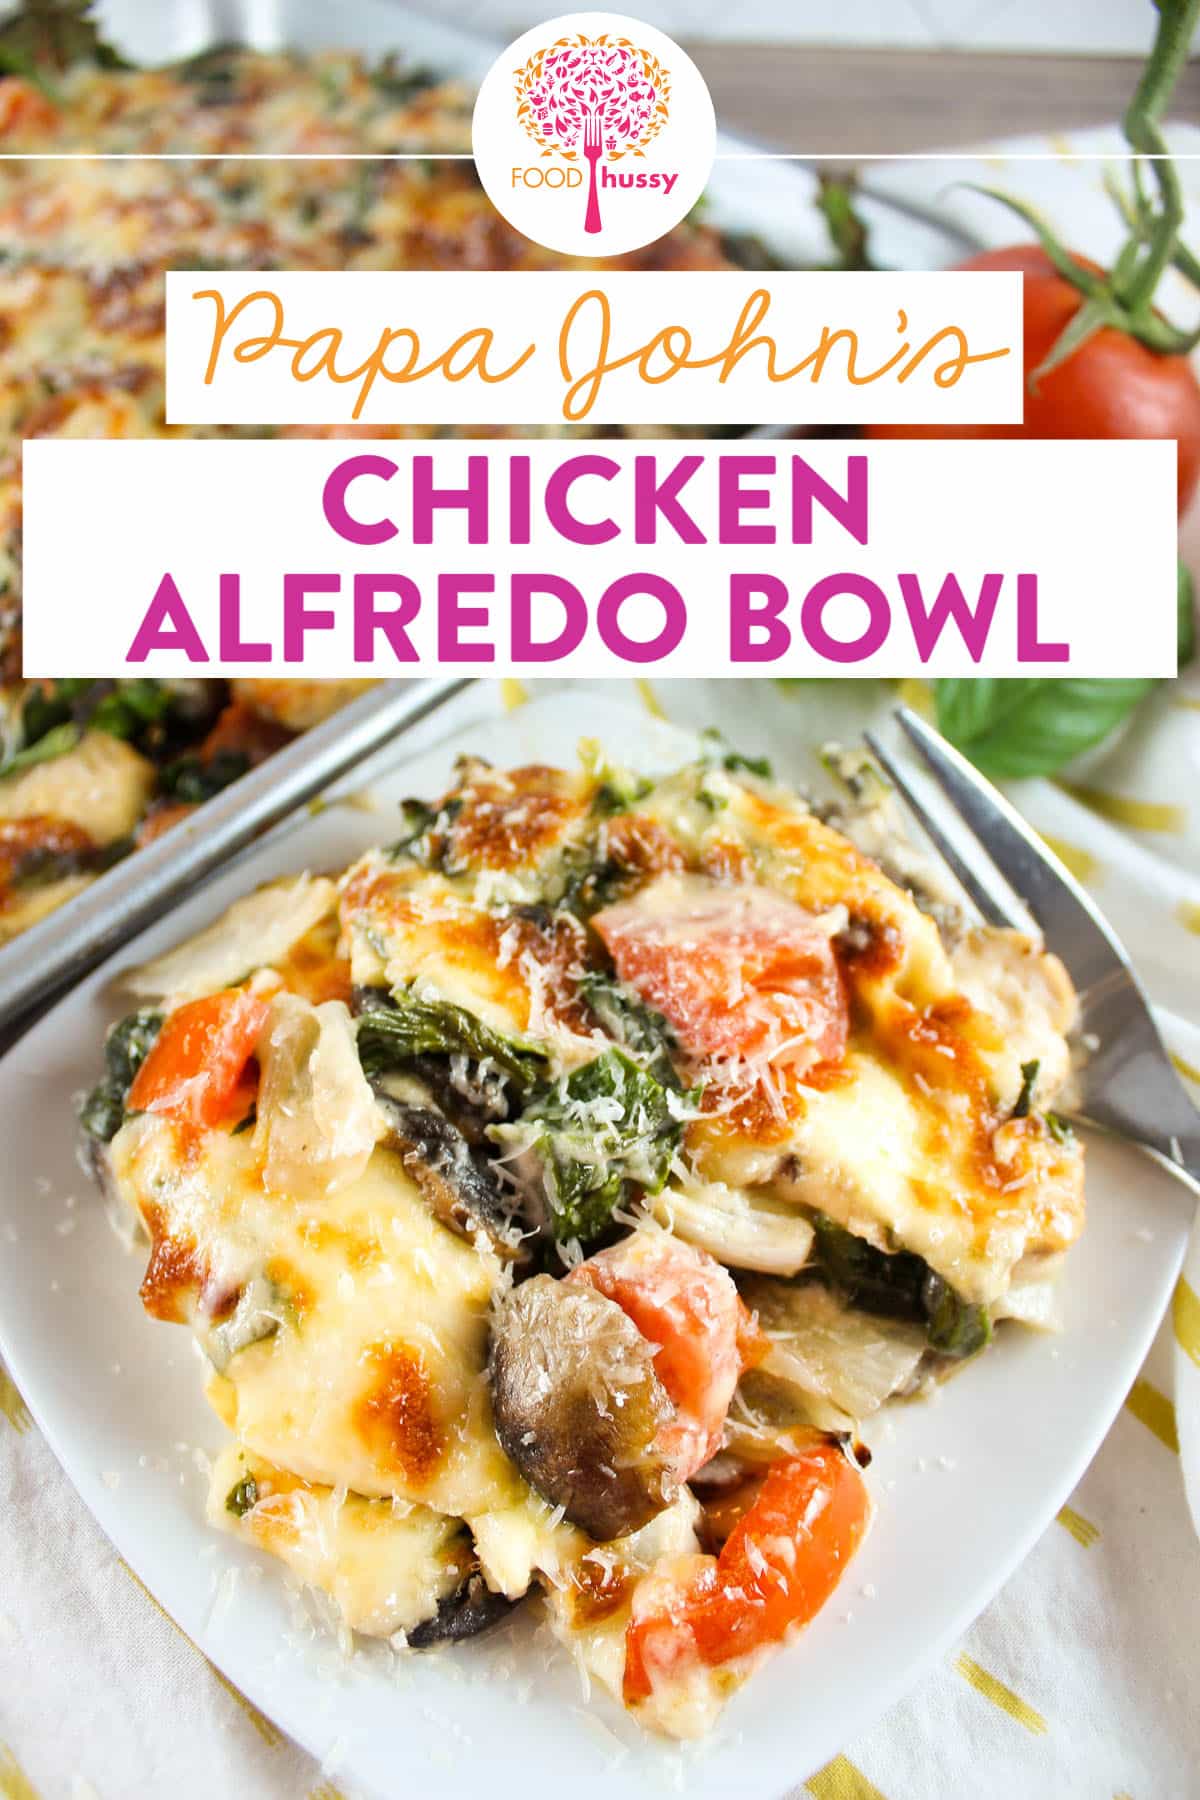 The Papa John's Chicken Alfredo Bowl is my favorite menu item at Papa John's. But - I can make it at home and have enough to feed four people for the same price! Juicy chicken, lots of cheese and veggies - it's a delicious low-carb meal!
 via @foodhussy